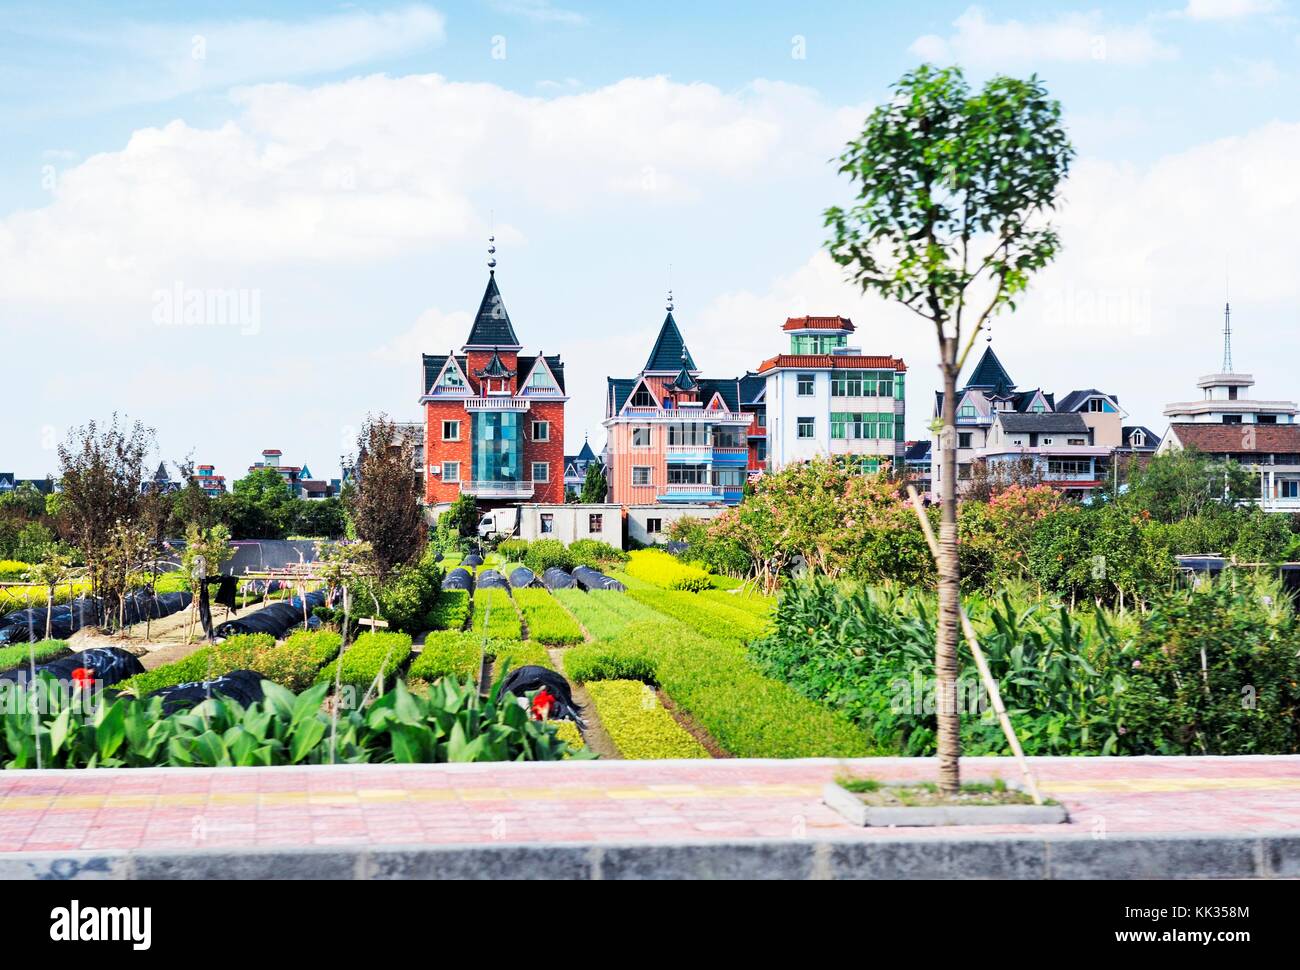 Hangzhou, China. Typical modern Chinese farmhouse farmhouses and vegetable gardens along the Huhang Expressway between Hangzhou and Shanghai Stock Photo